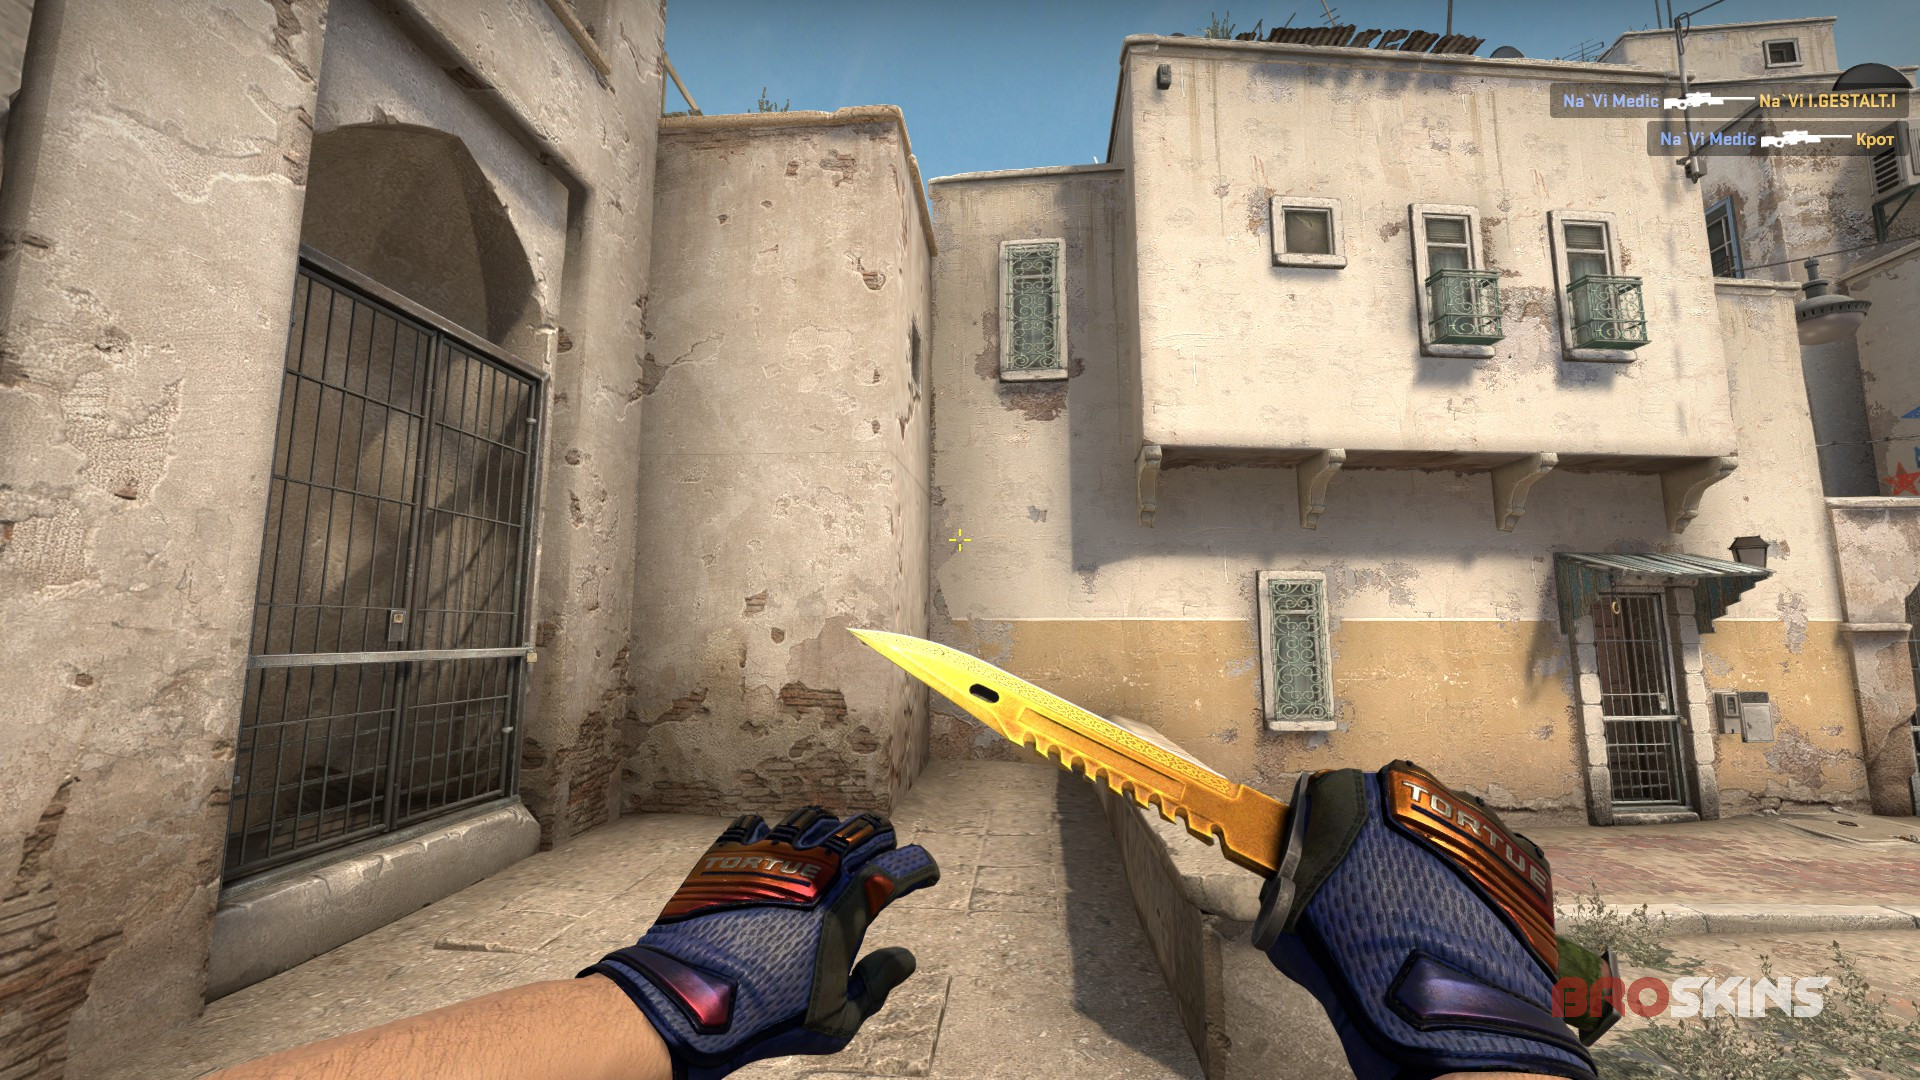 Specialist Gloves Fade (yellow tip) + M9 Bayonet  Lore